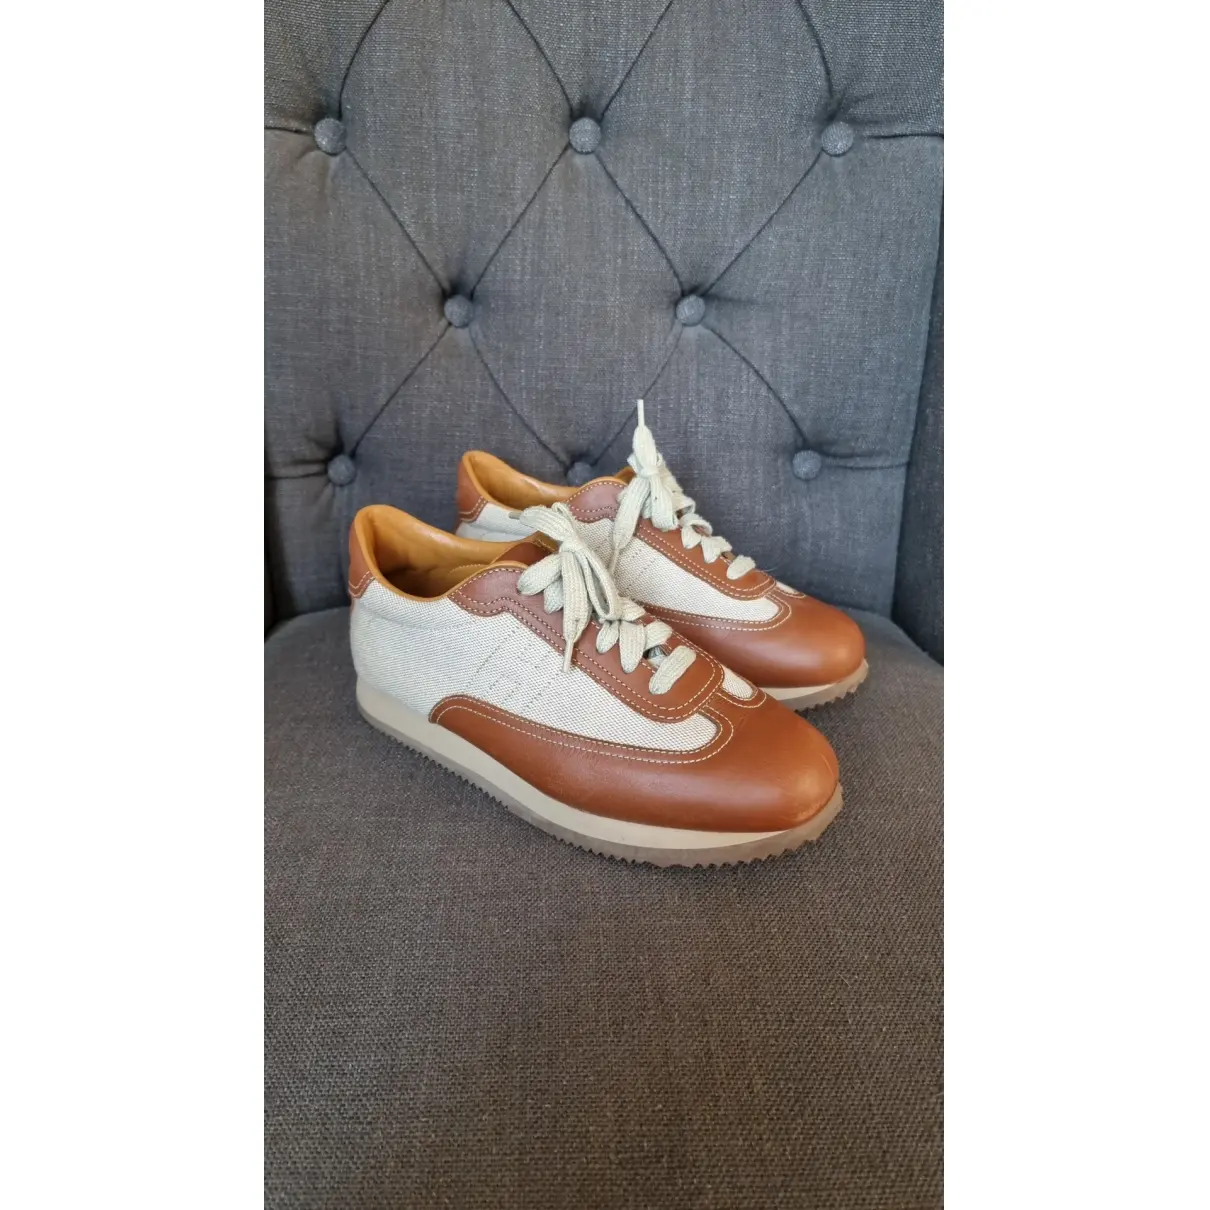 Buy Hermès Quicker leather trainers online